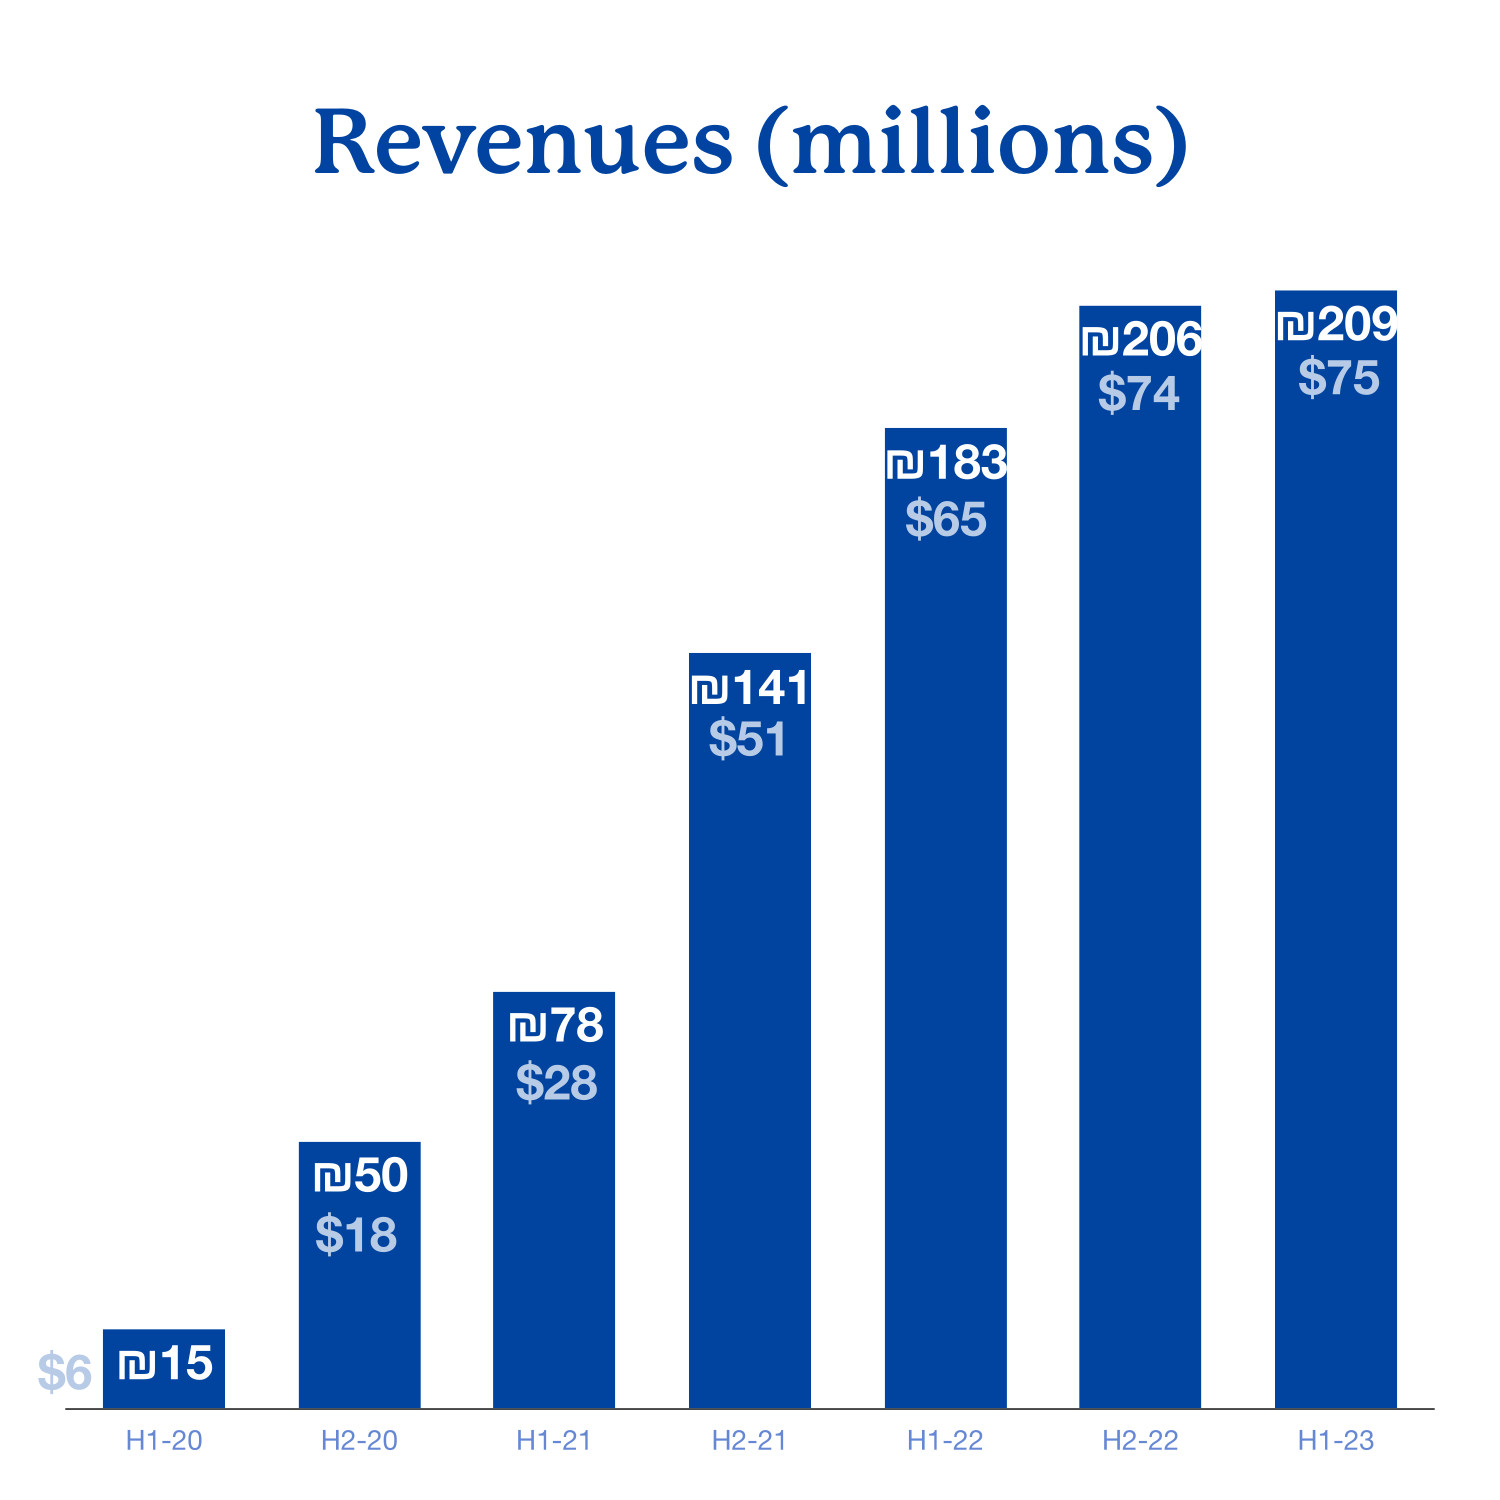 Half Year Revenues 2020 to 2023